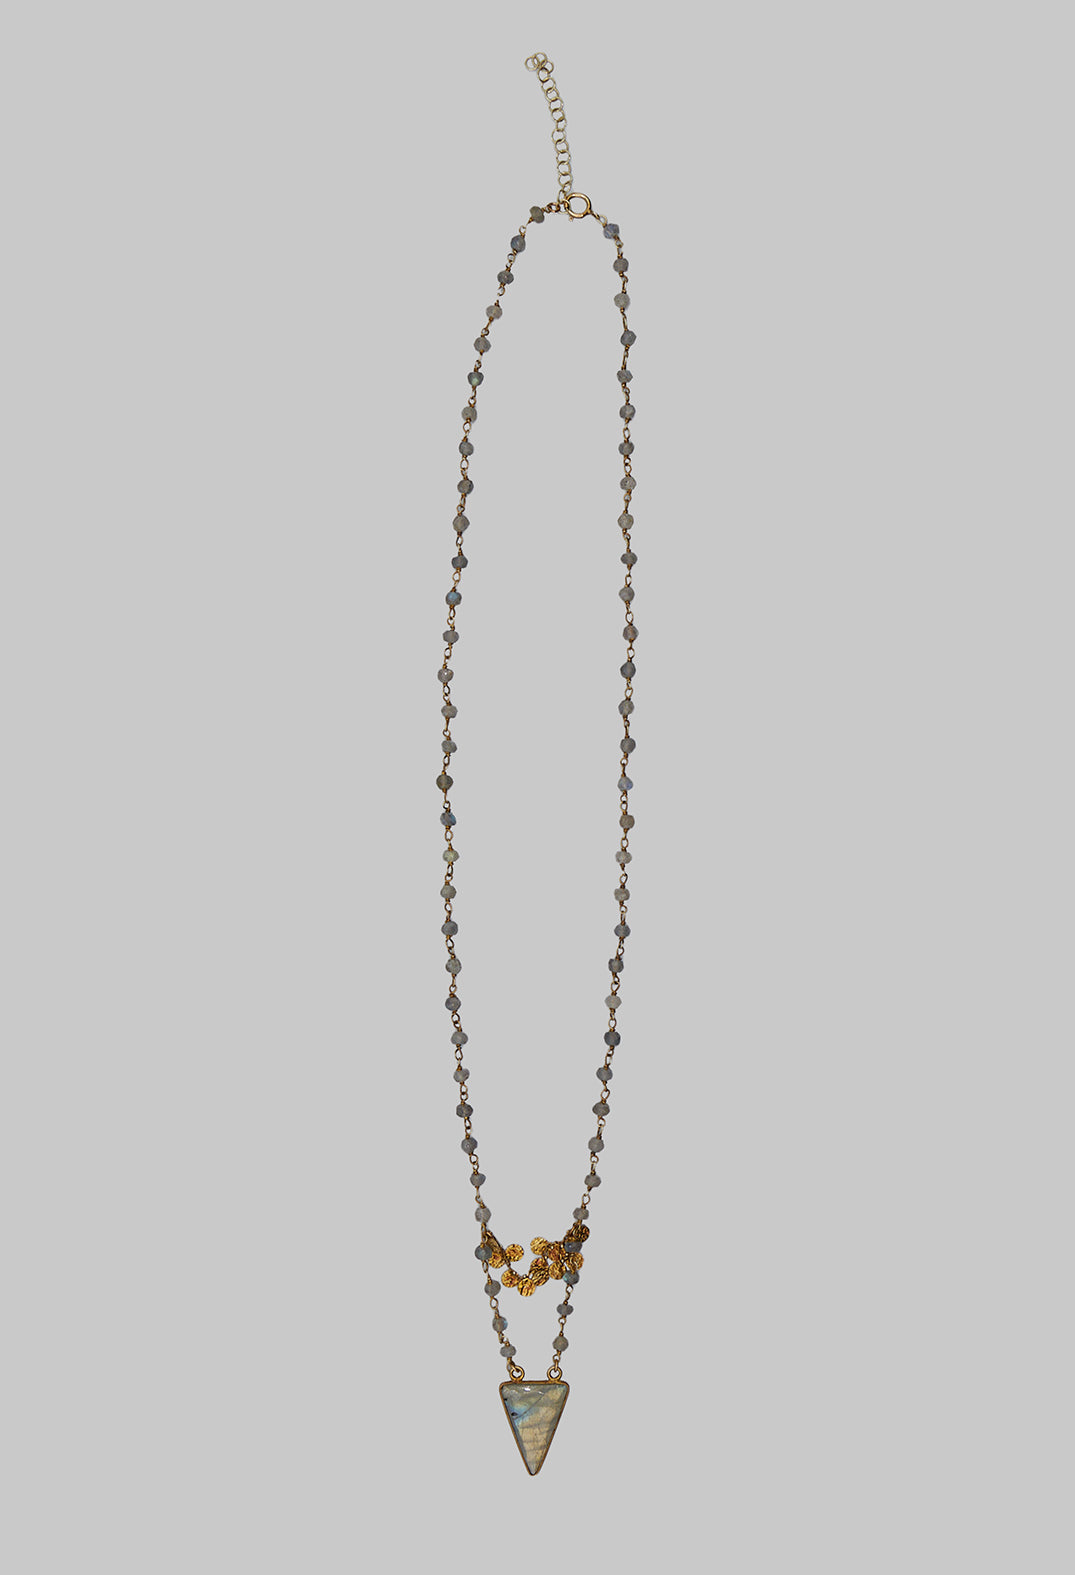 Chain Necklace with Labradorite Pendant in Gold